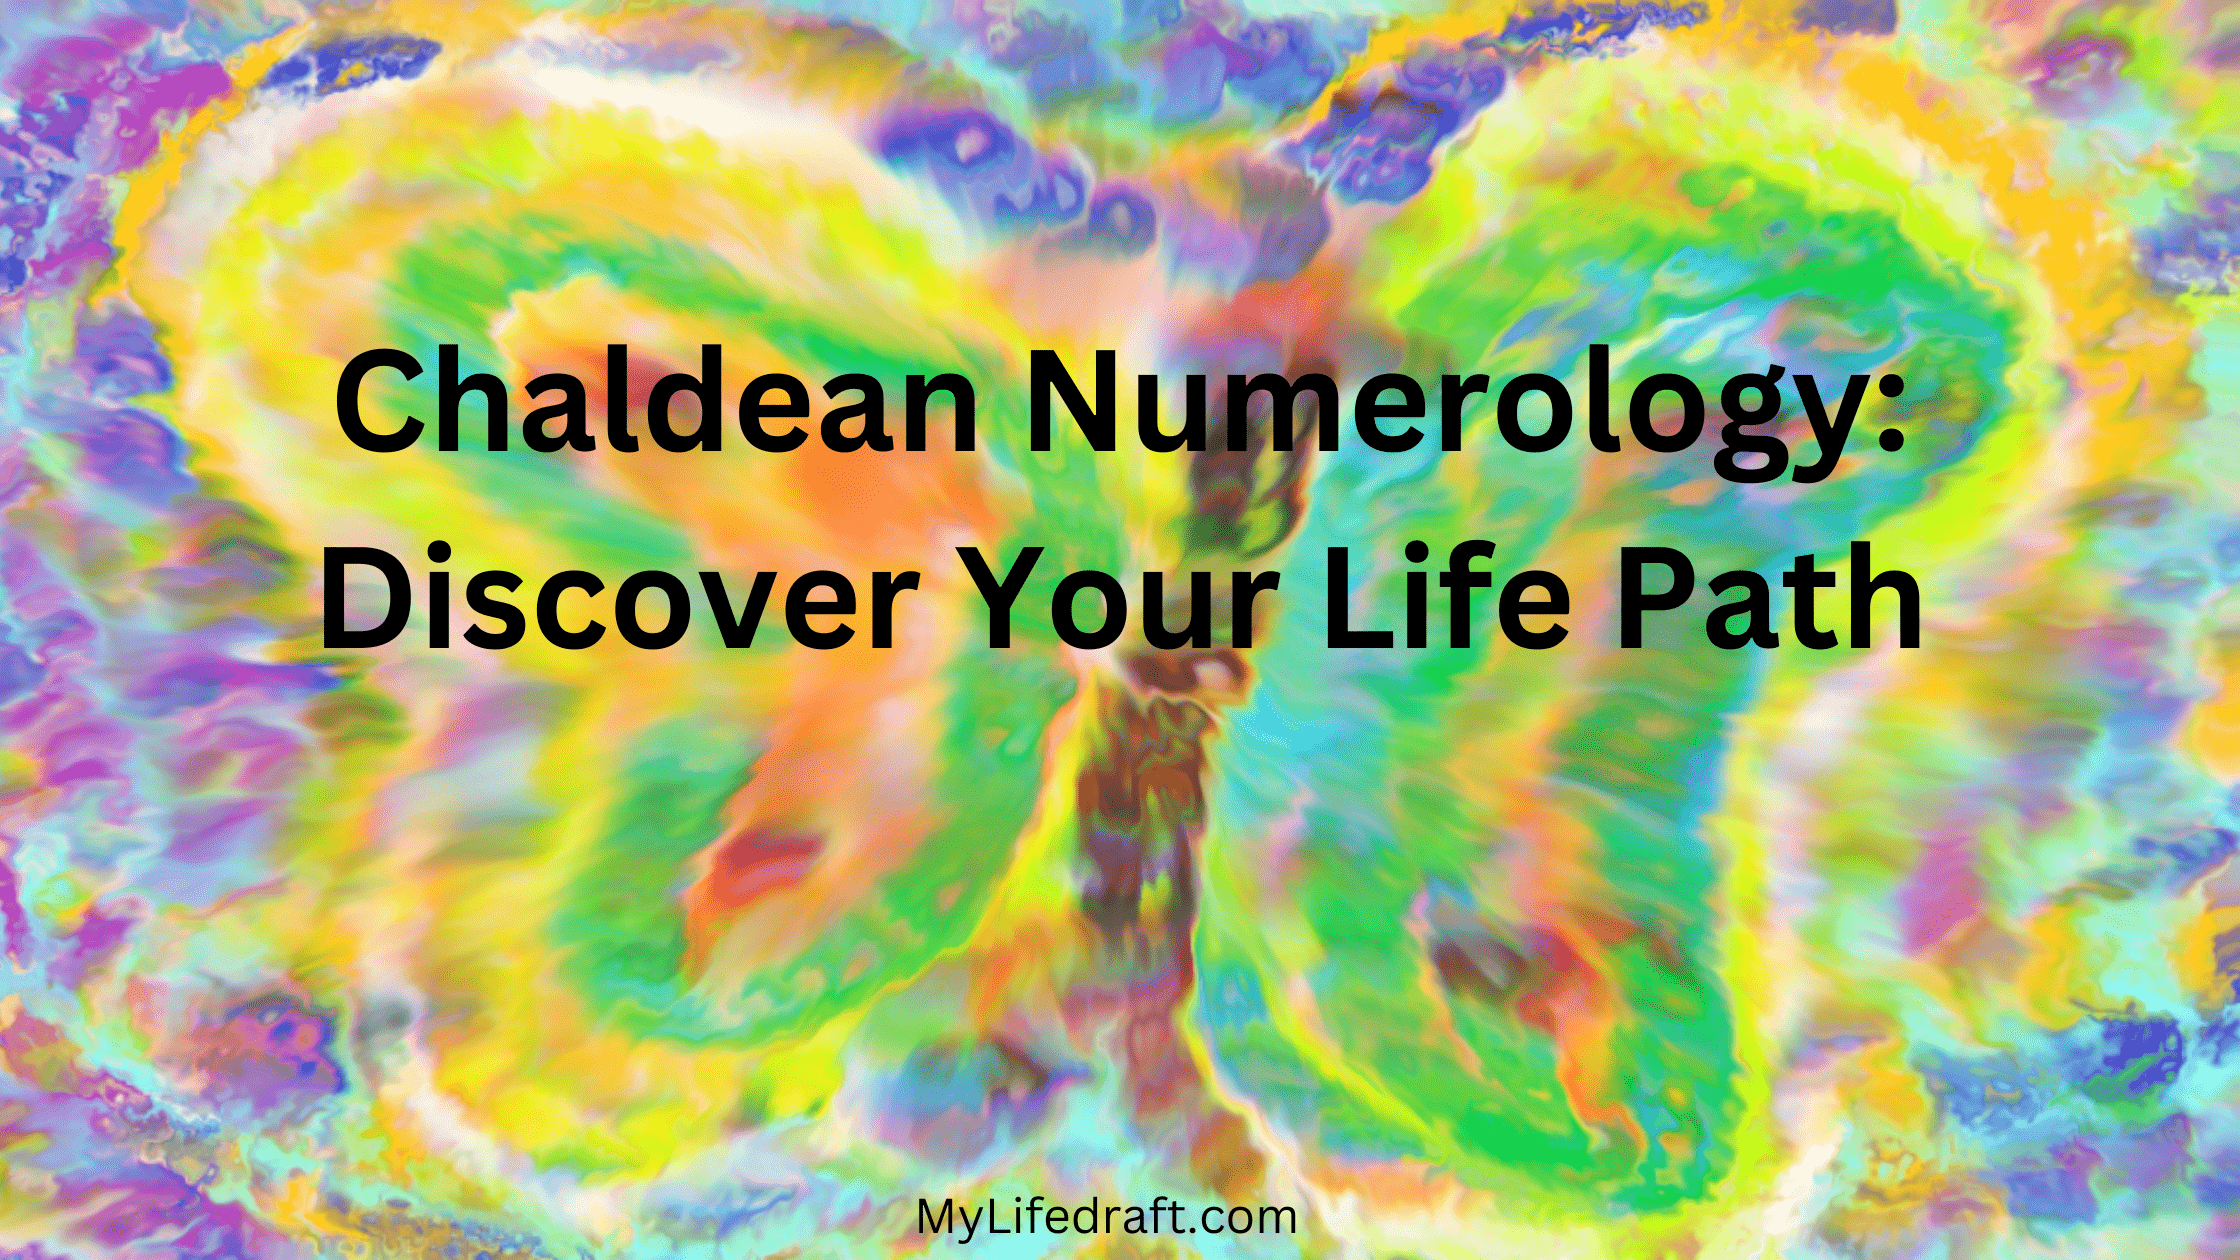 Chaldean Numerology: Discover Your Life Path